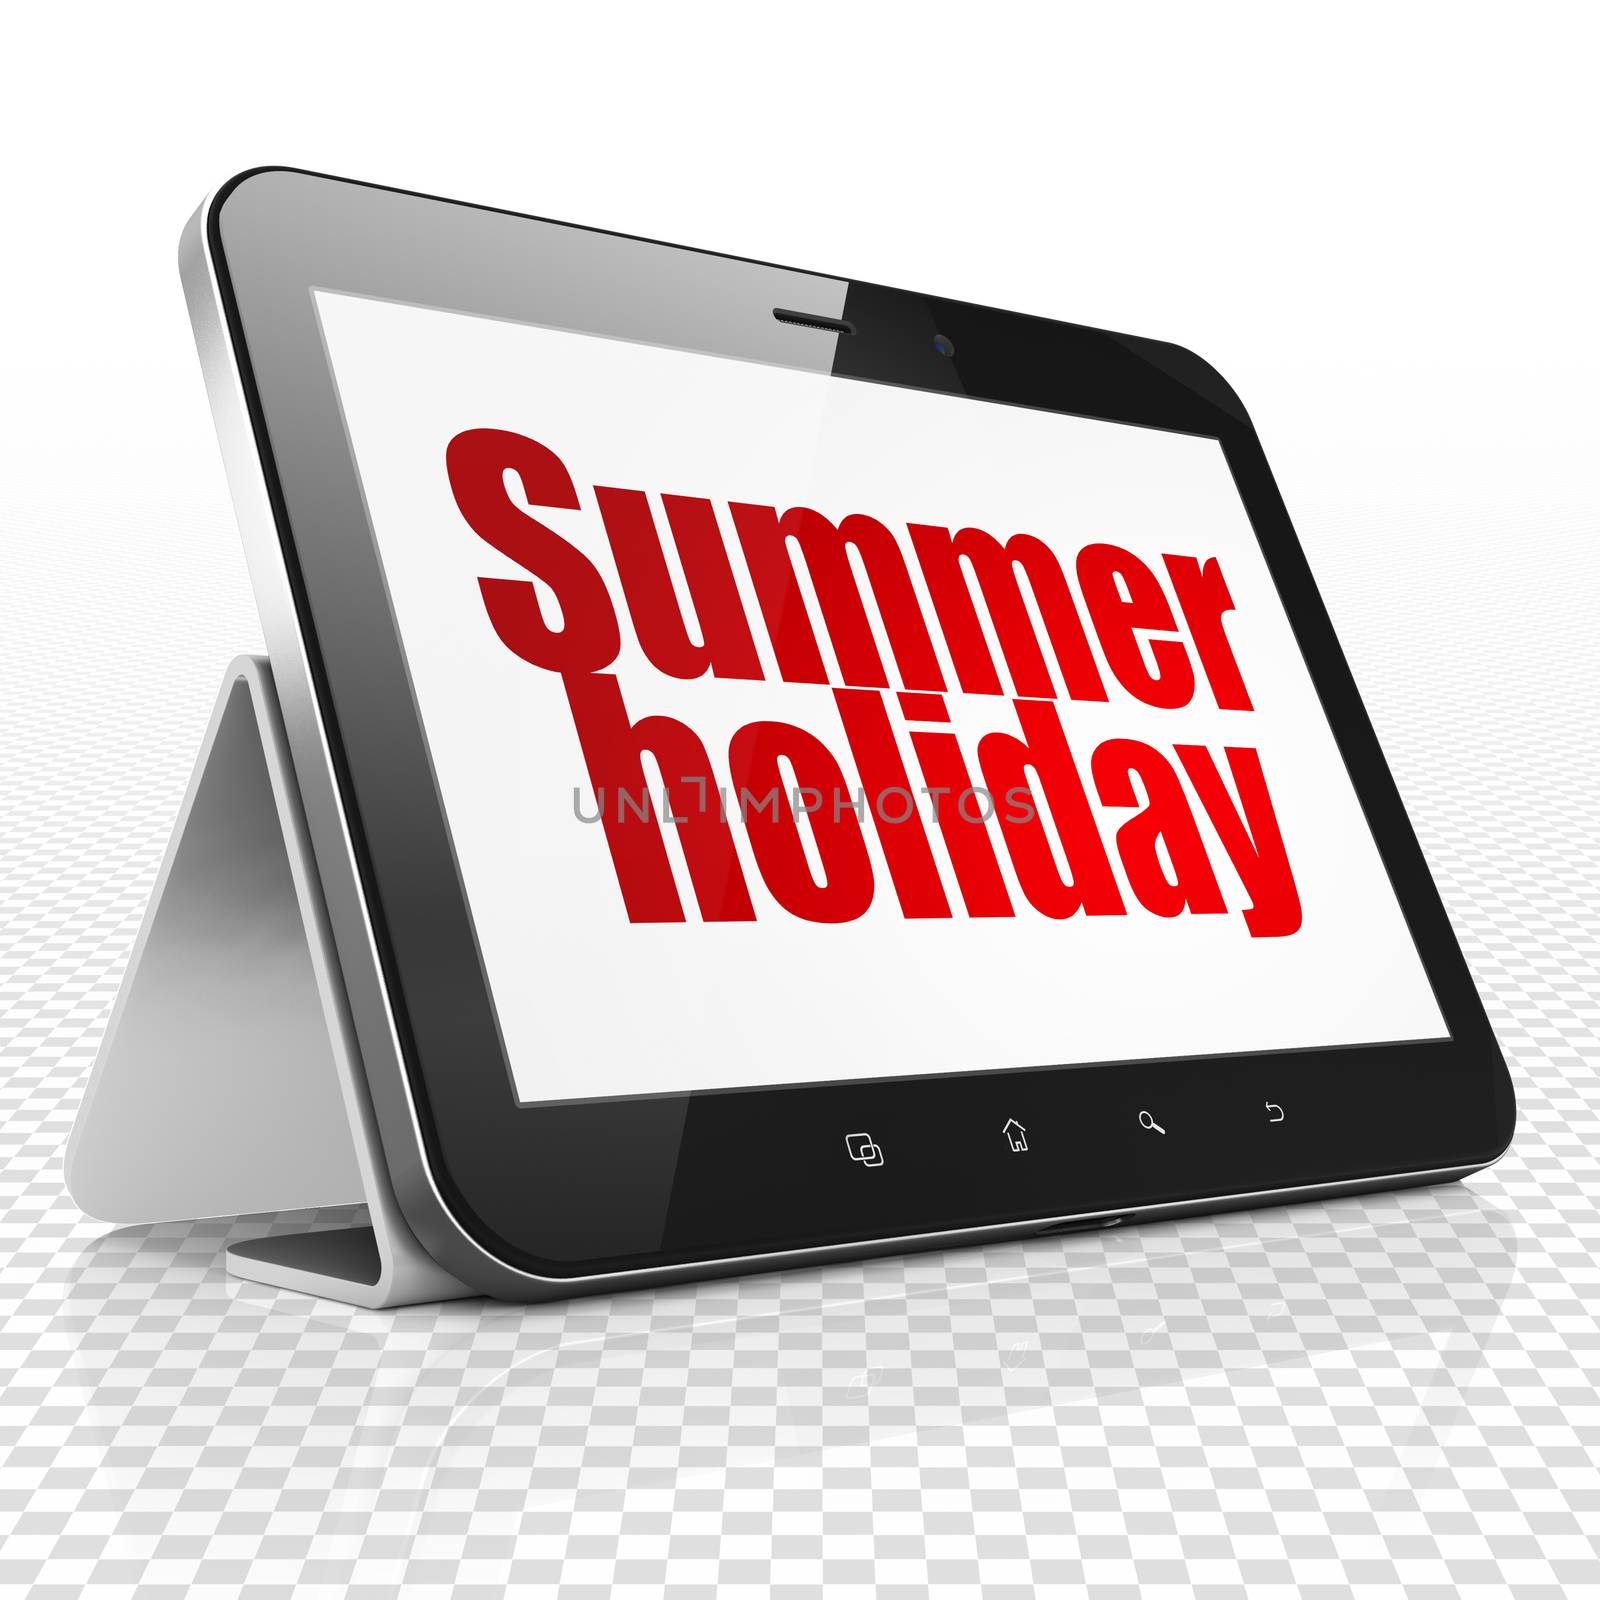 Vacation concept: Tablet Computer with red text Summer Holiday on display, 3D rendering